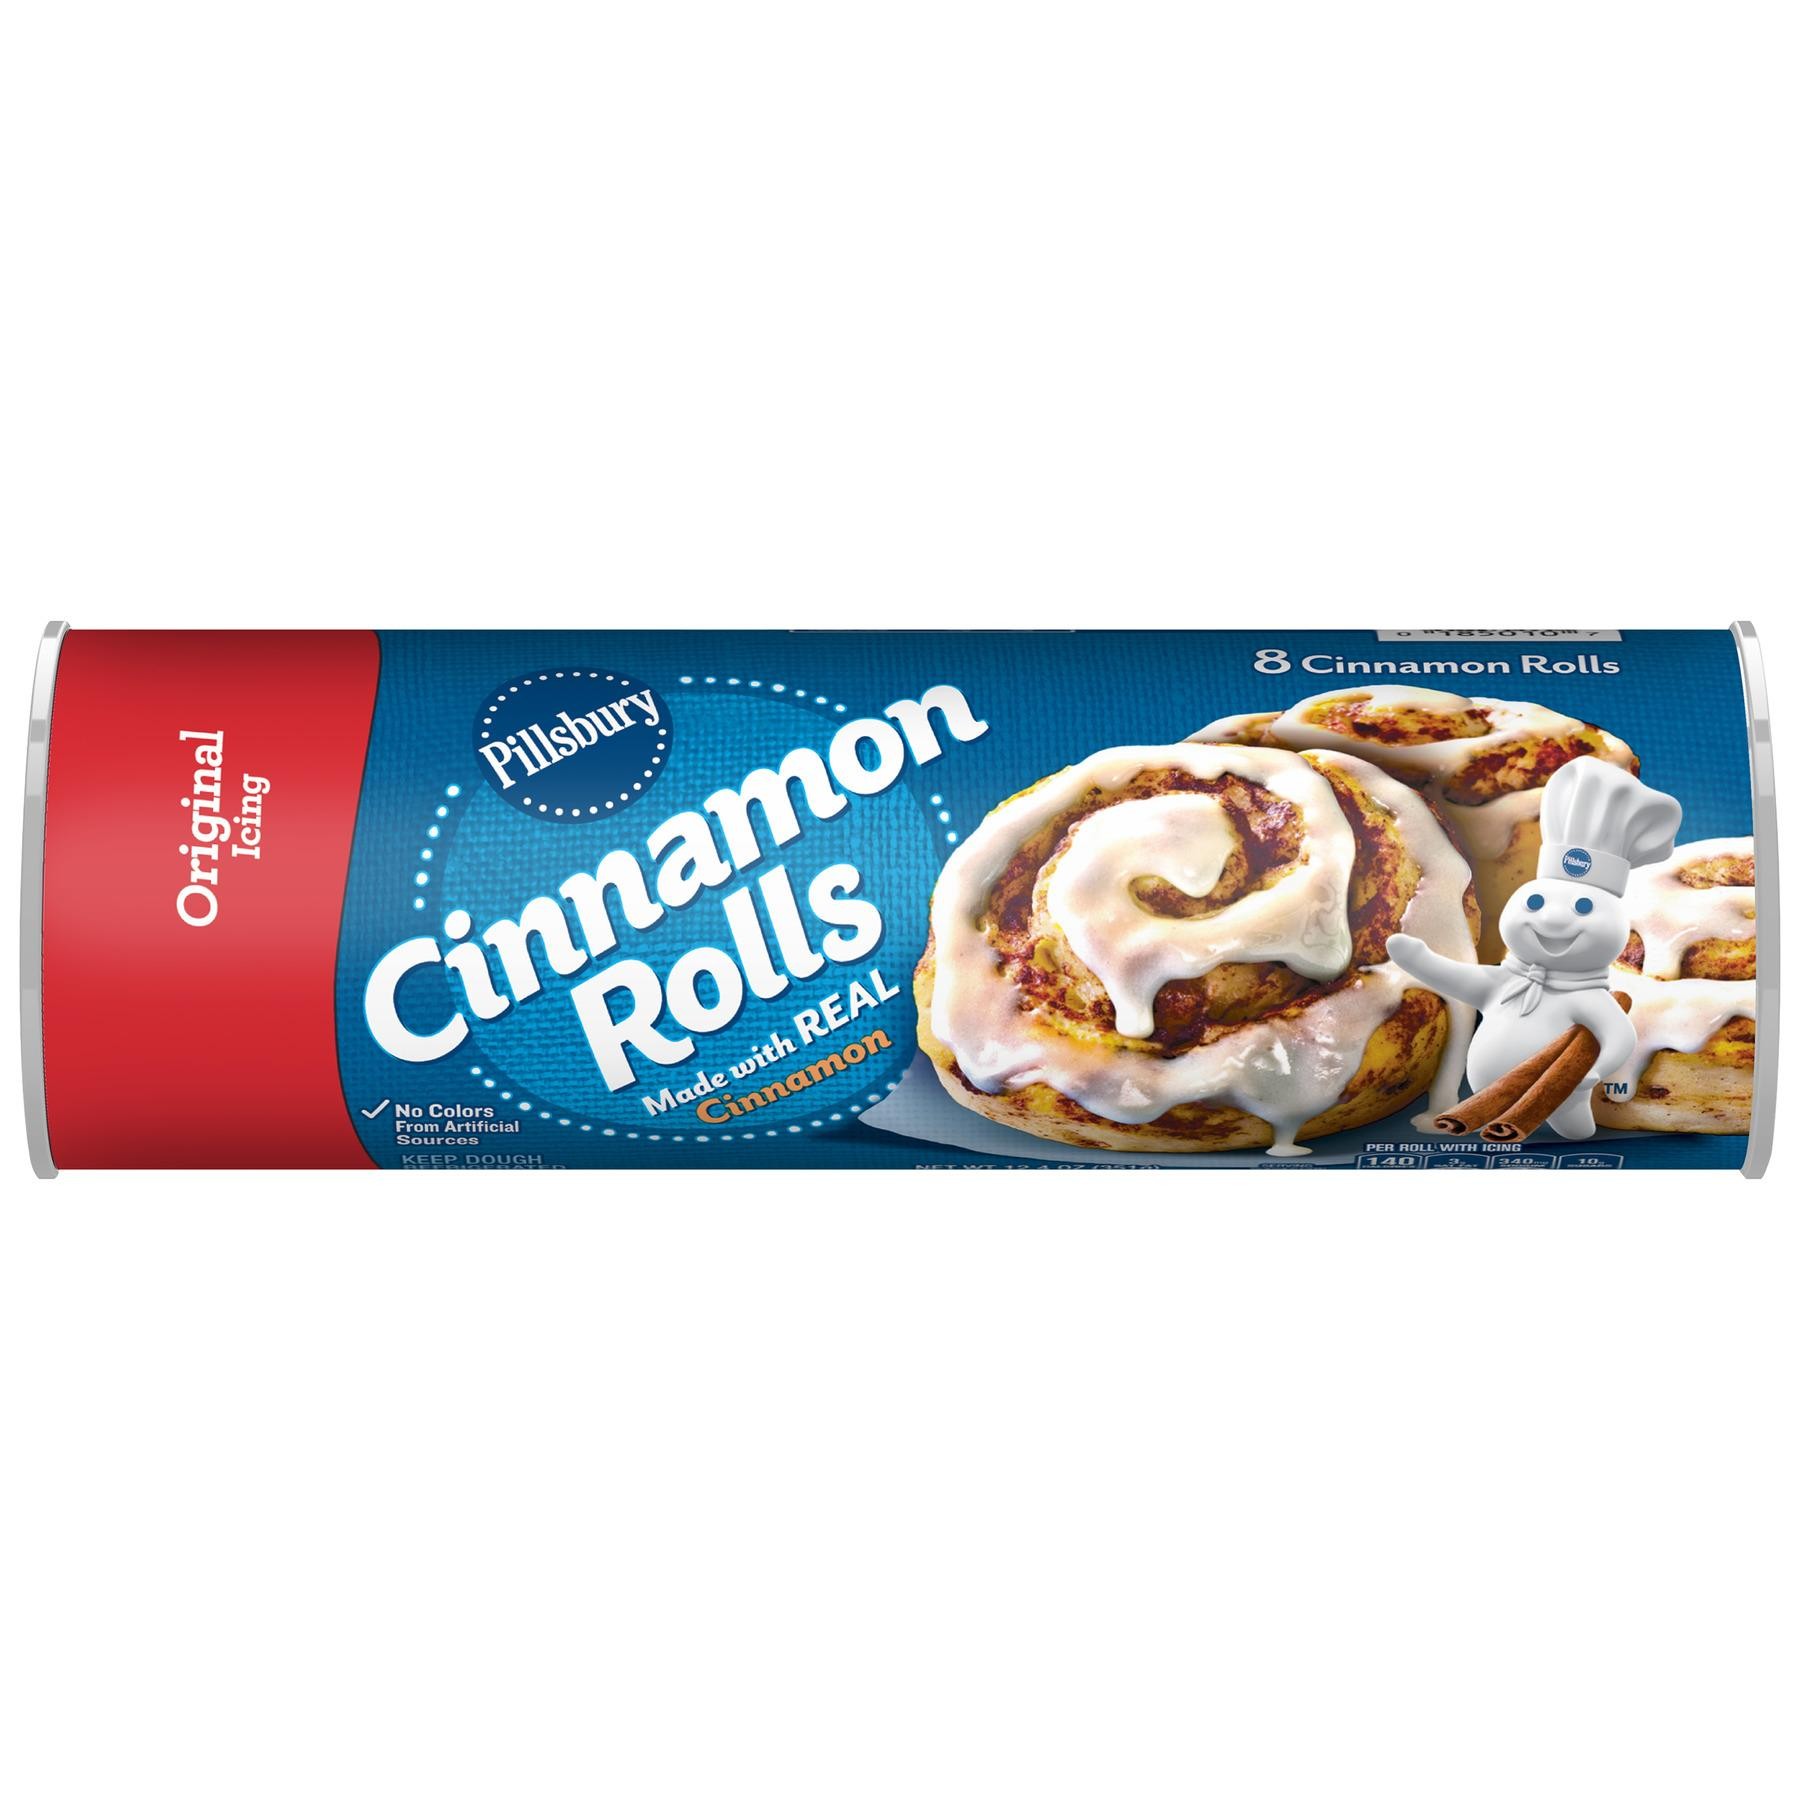 Pillsbury Refrigerated Rolls with Icing 8 Pack - 12.4 Ounces